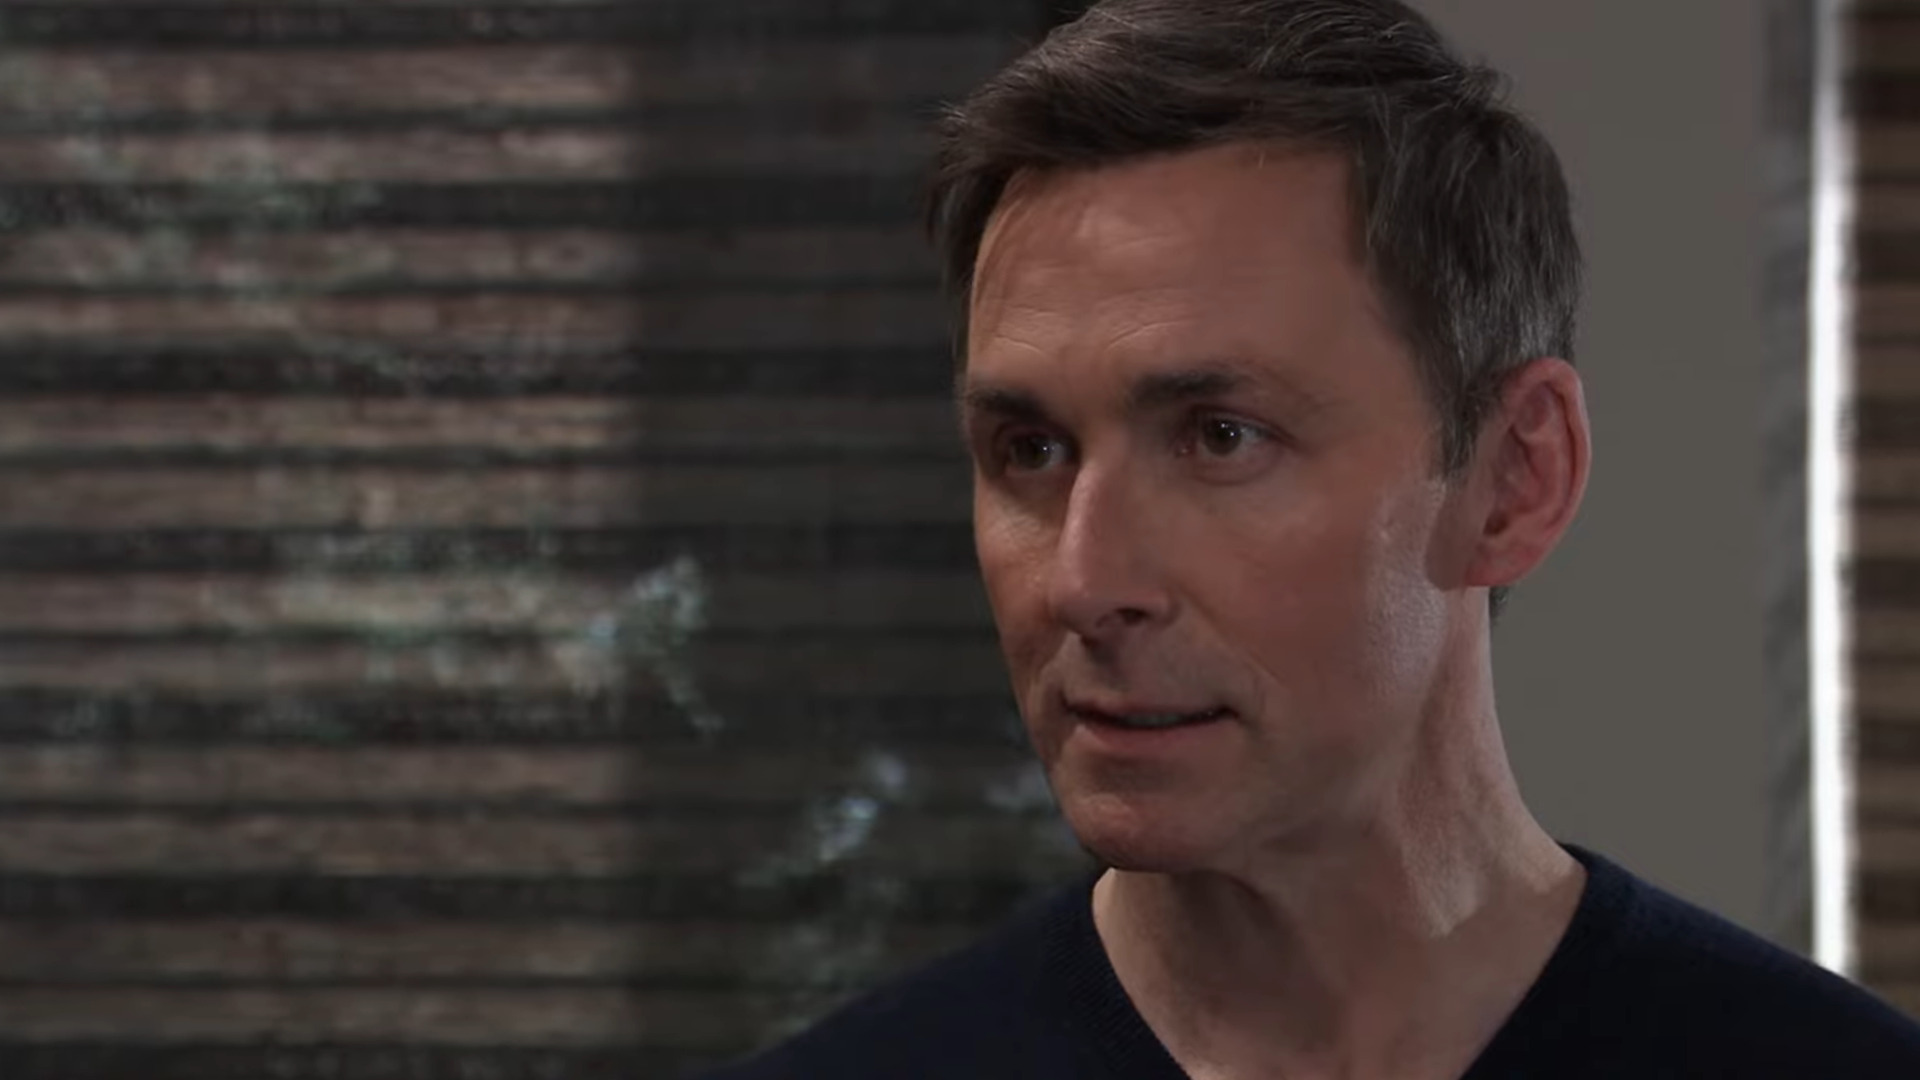 valentin plots with felicia GH Recaps SoapsSpoilers